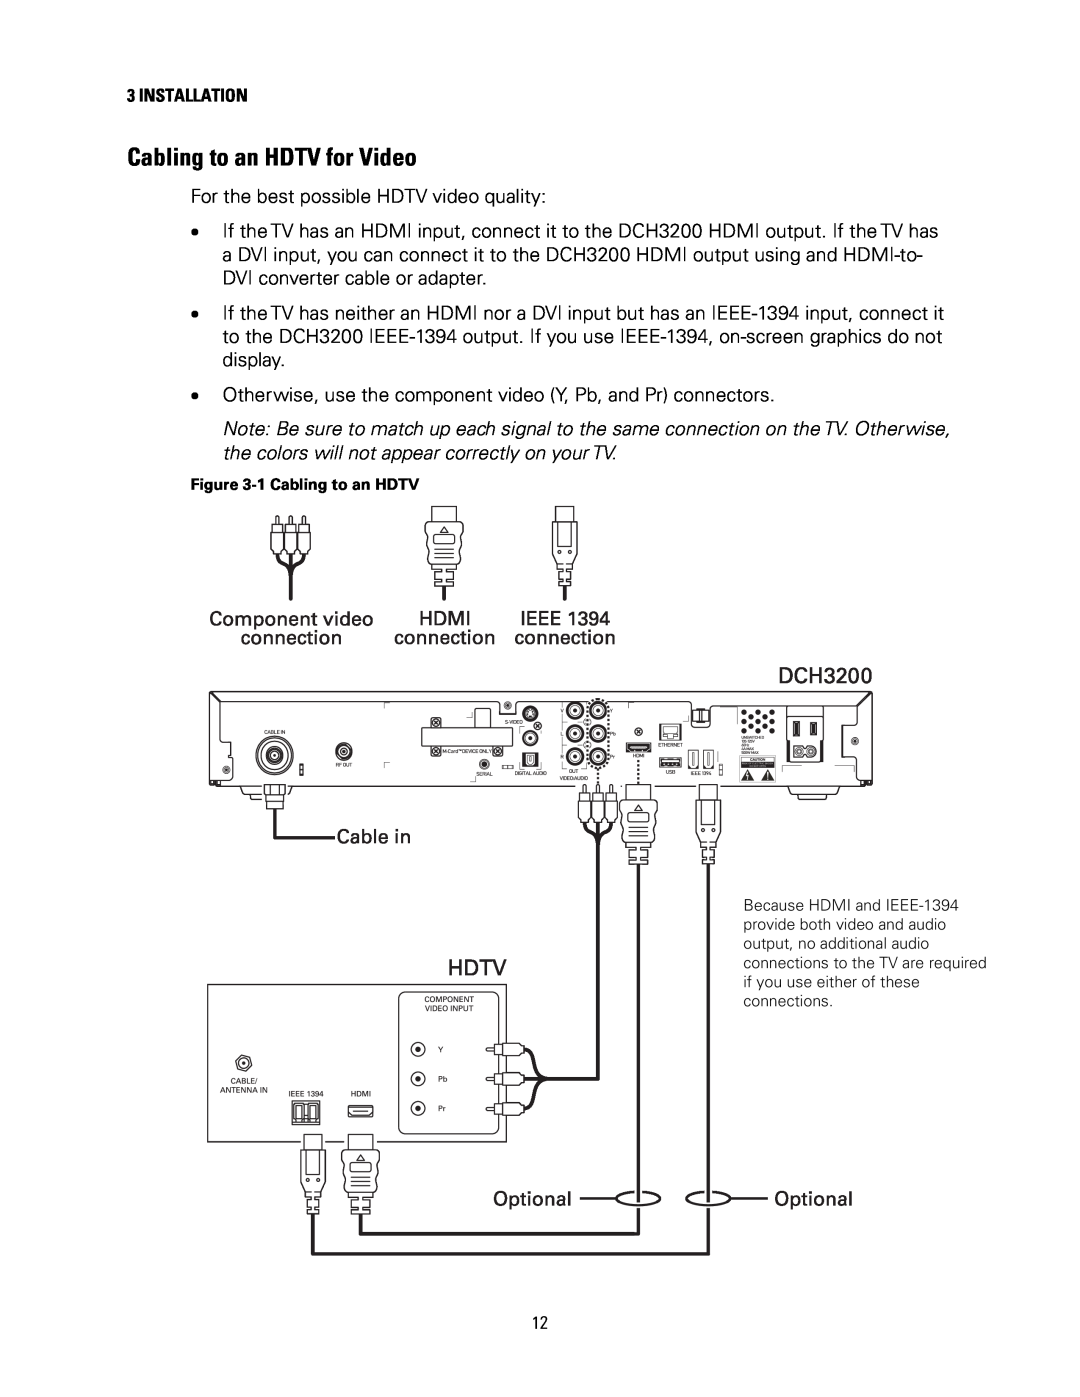 Motorola DCH3200 installation manual Cabling to an HDTV for Video 